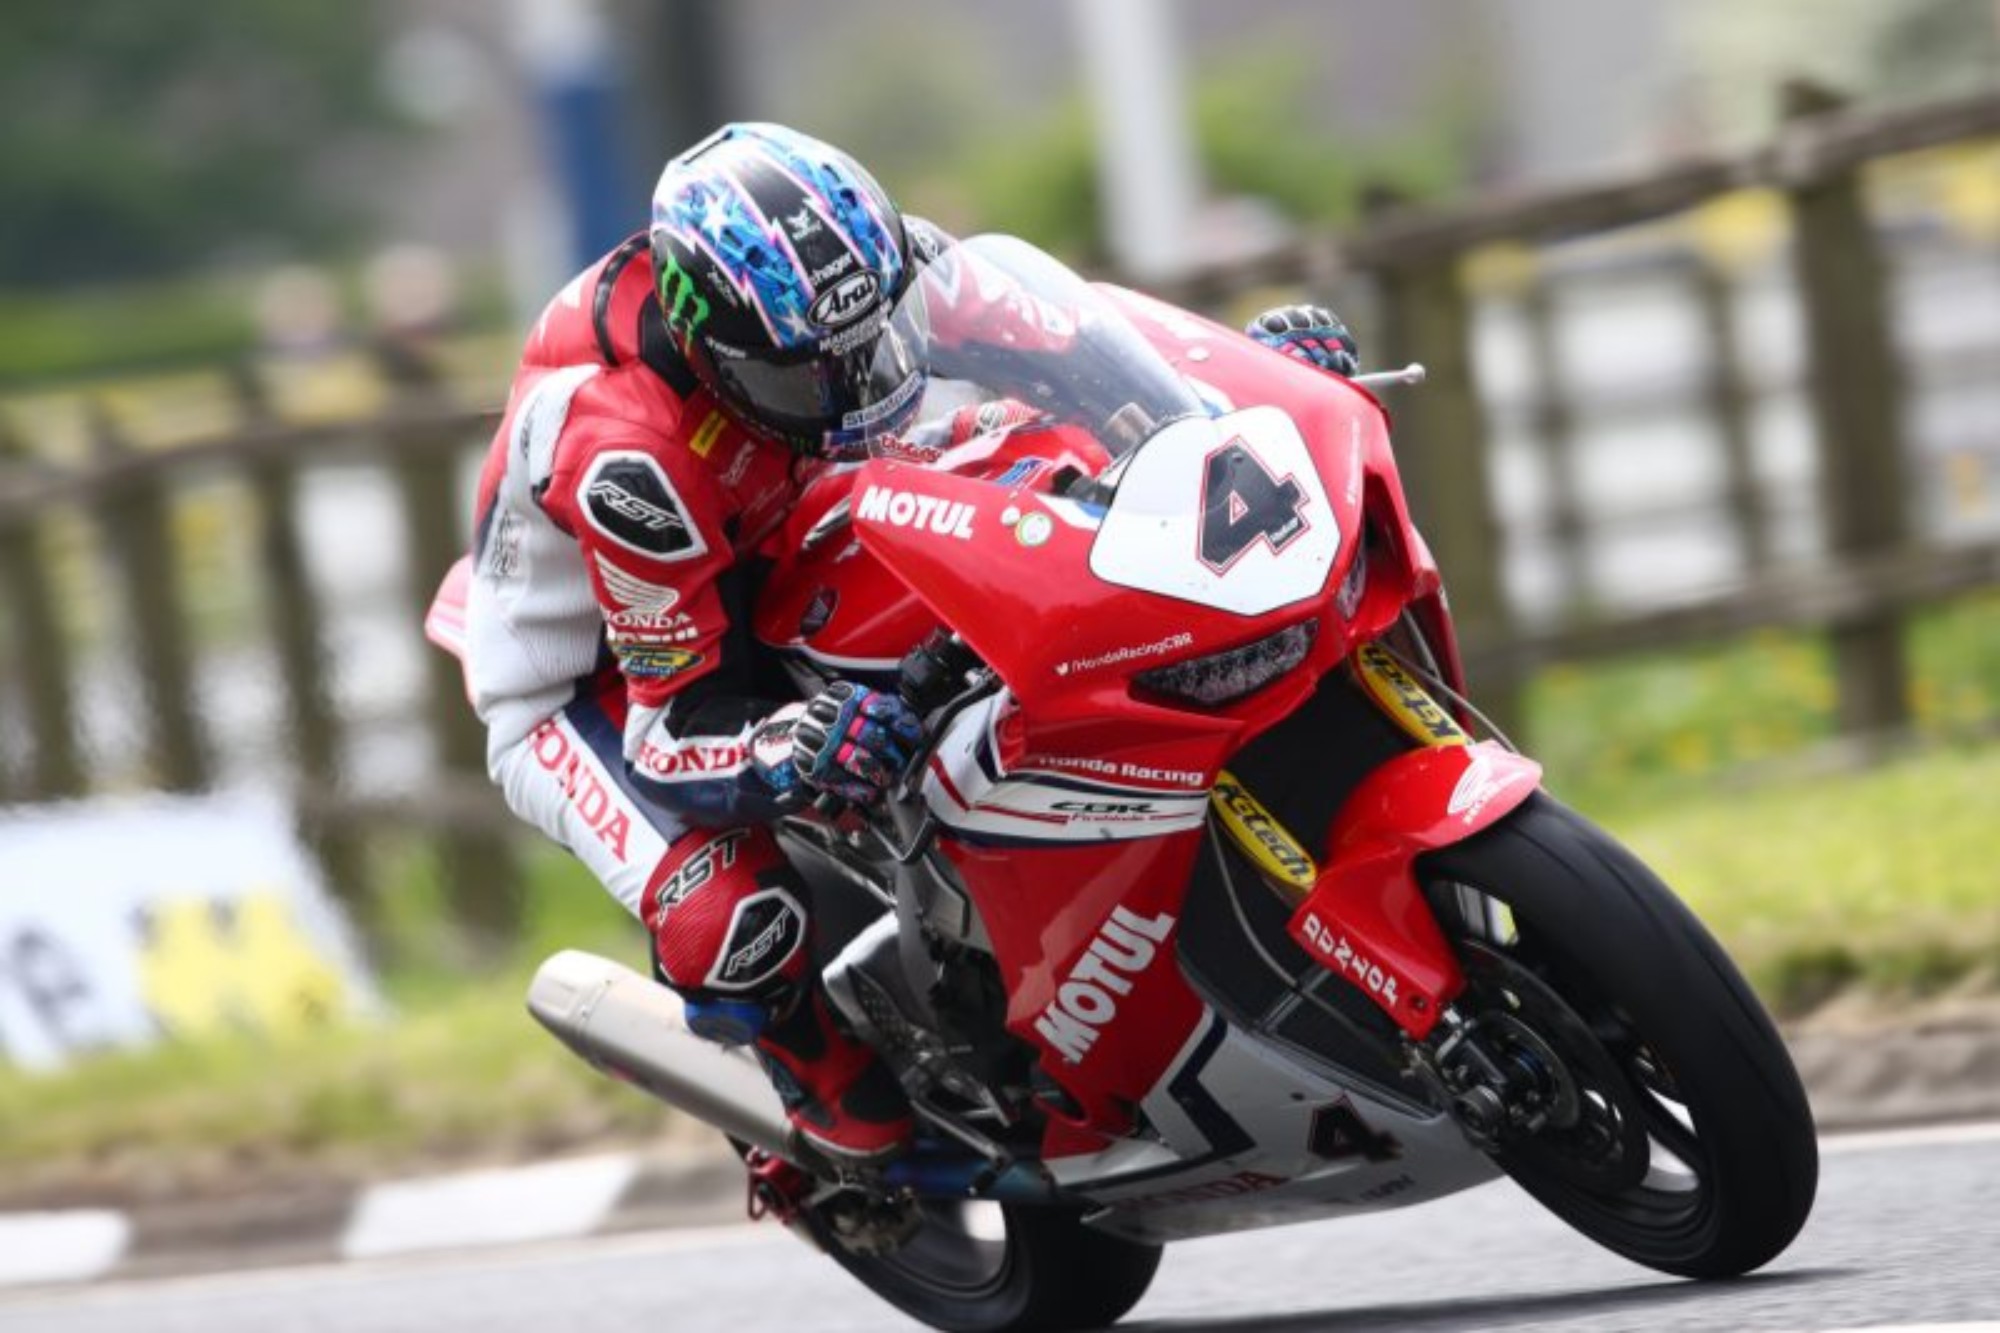 Isle Of Man TT Race Pictures And Wallpapers » Arthatravel.com